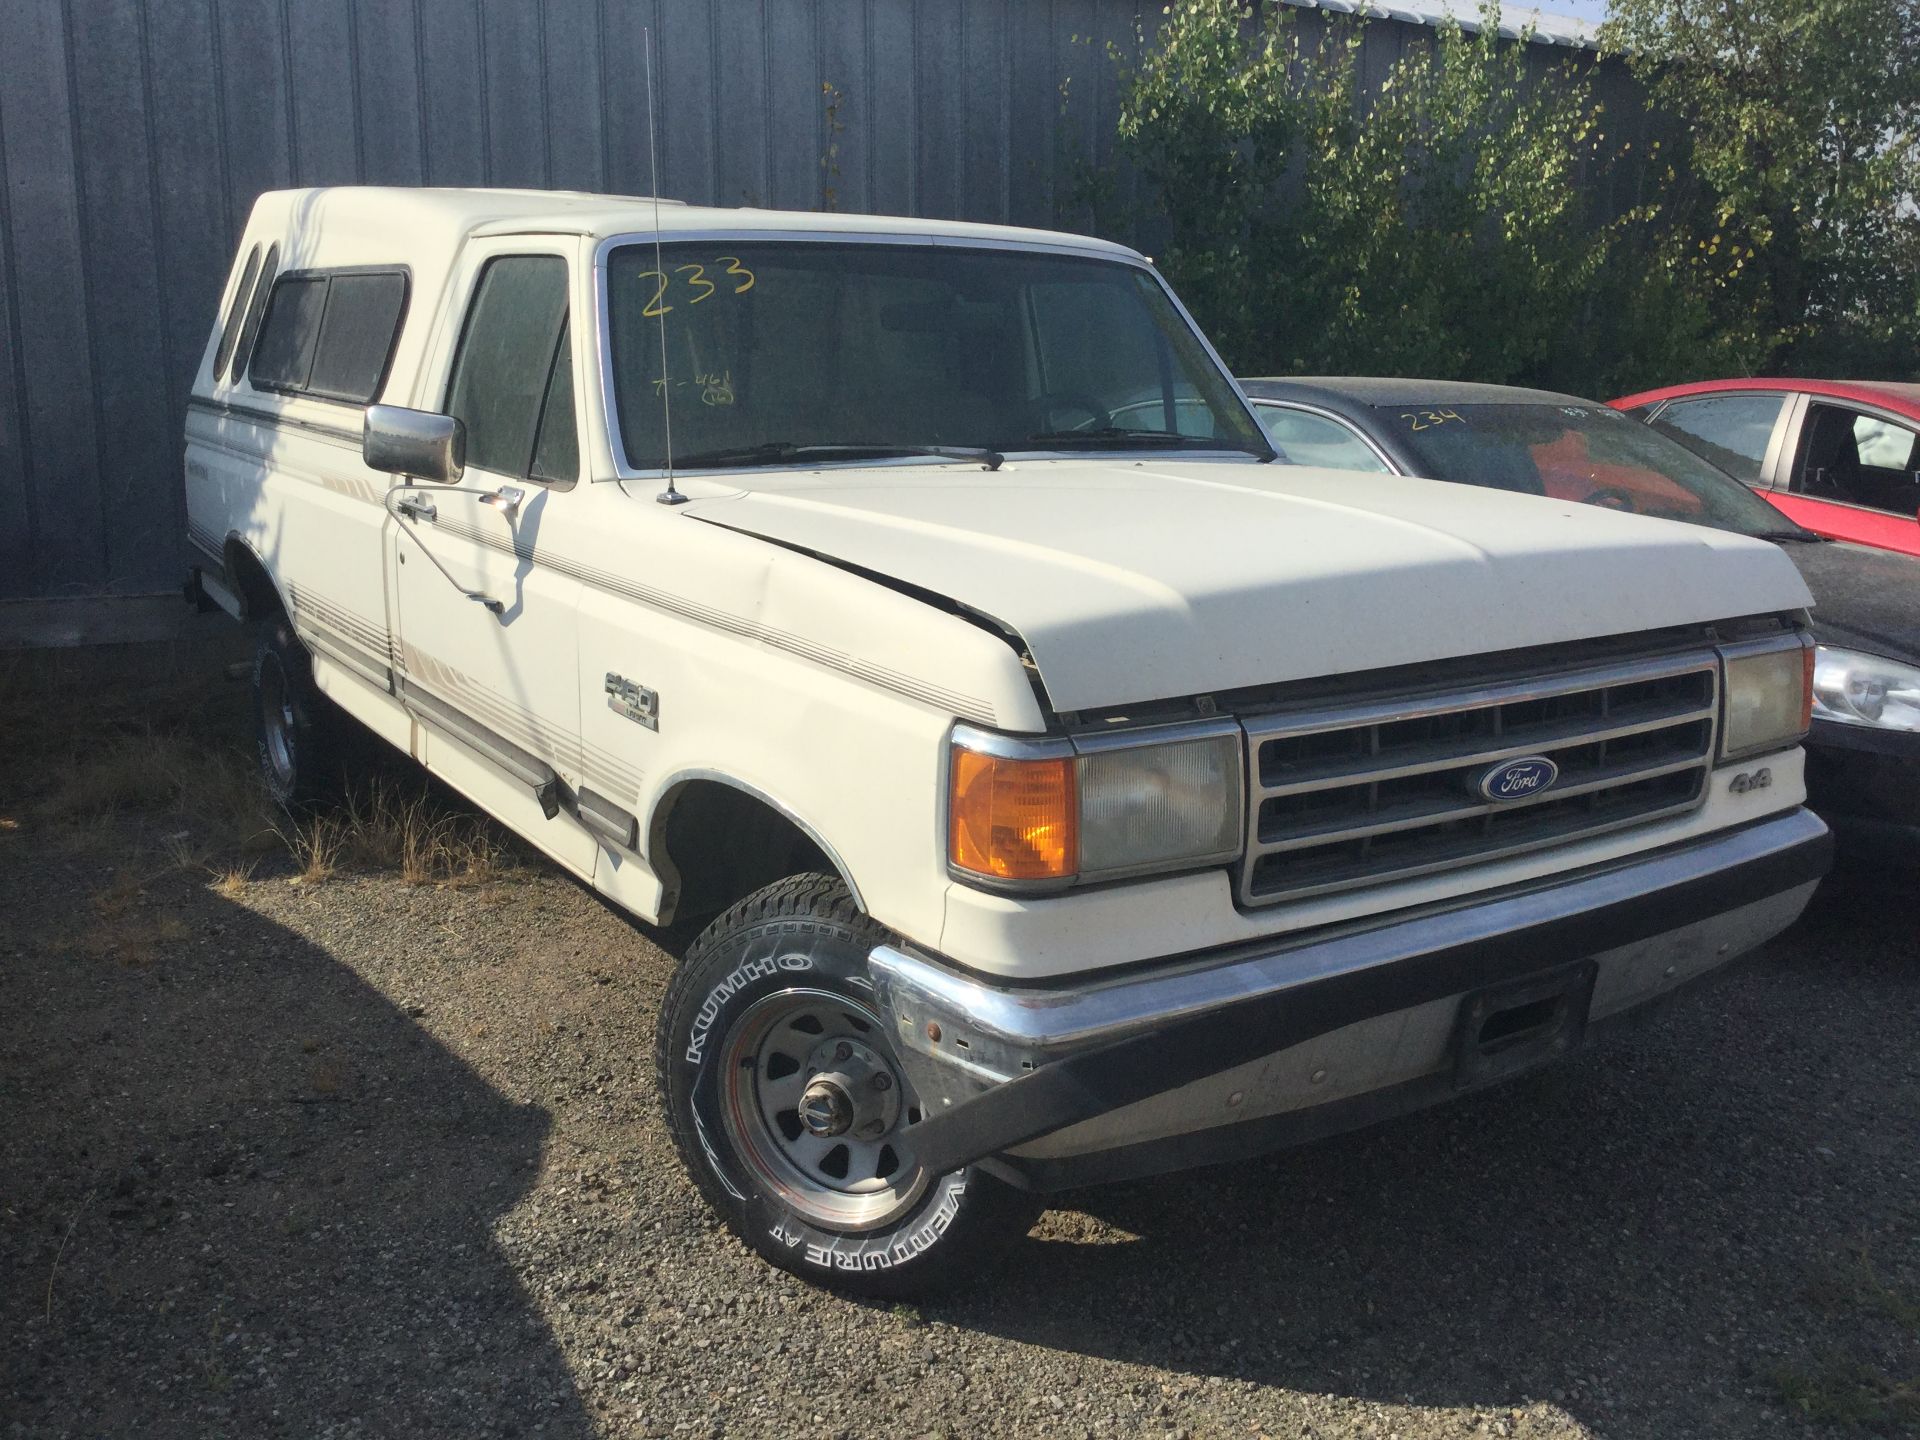 Year: 1989 Make: Ford Model: 1/2T Type: Pickup Vin#: A93975 Mileage/Hours: 20257 5.0L, 5sp, 4x4, RC, - Image 3 of 4